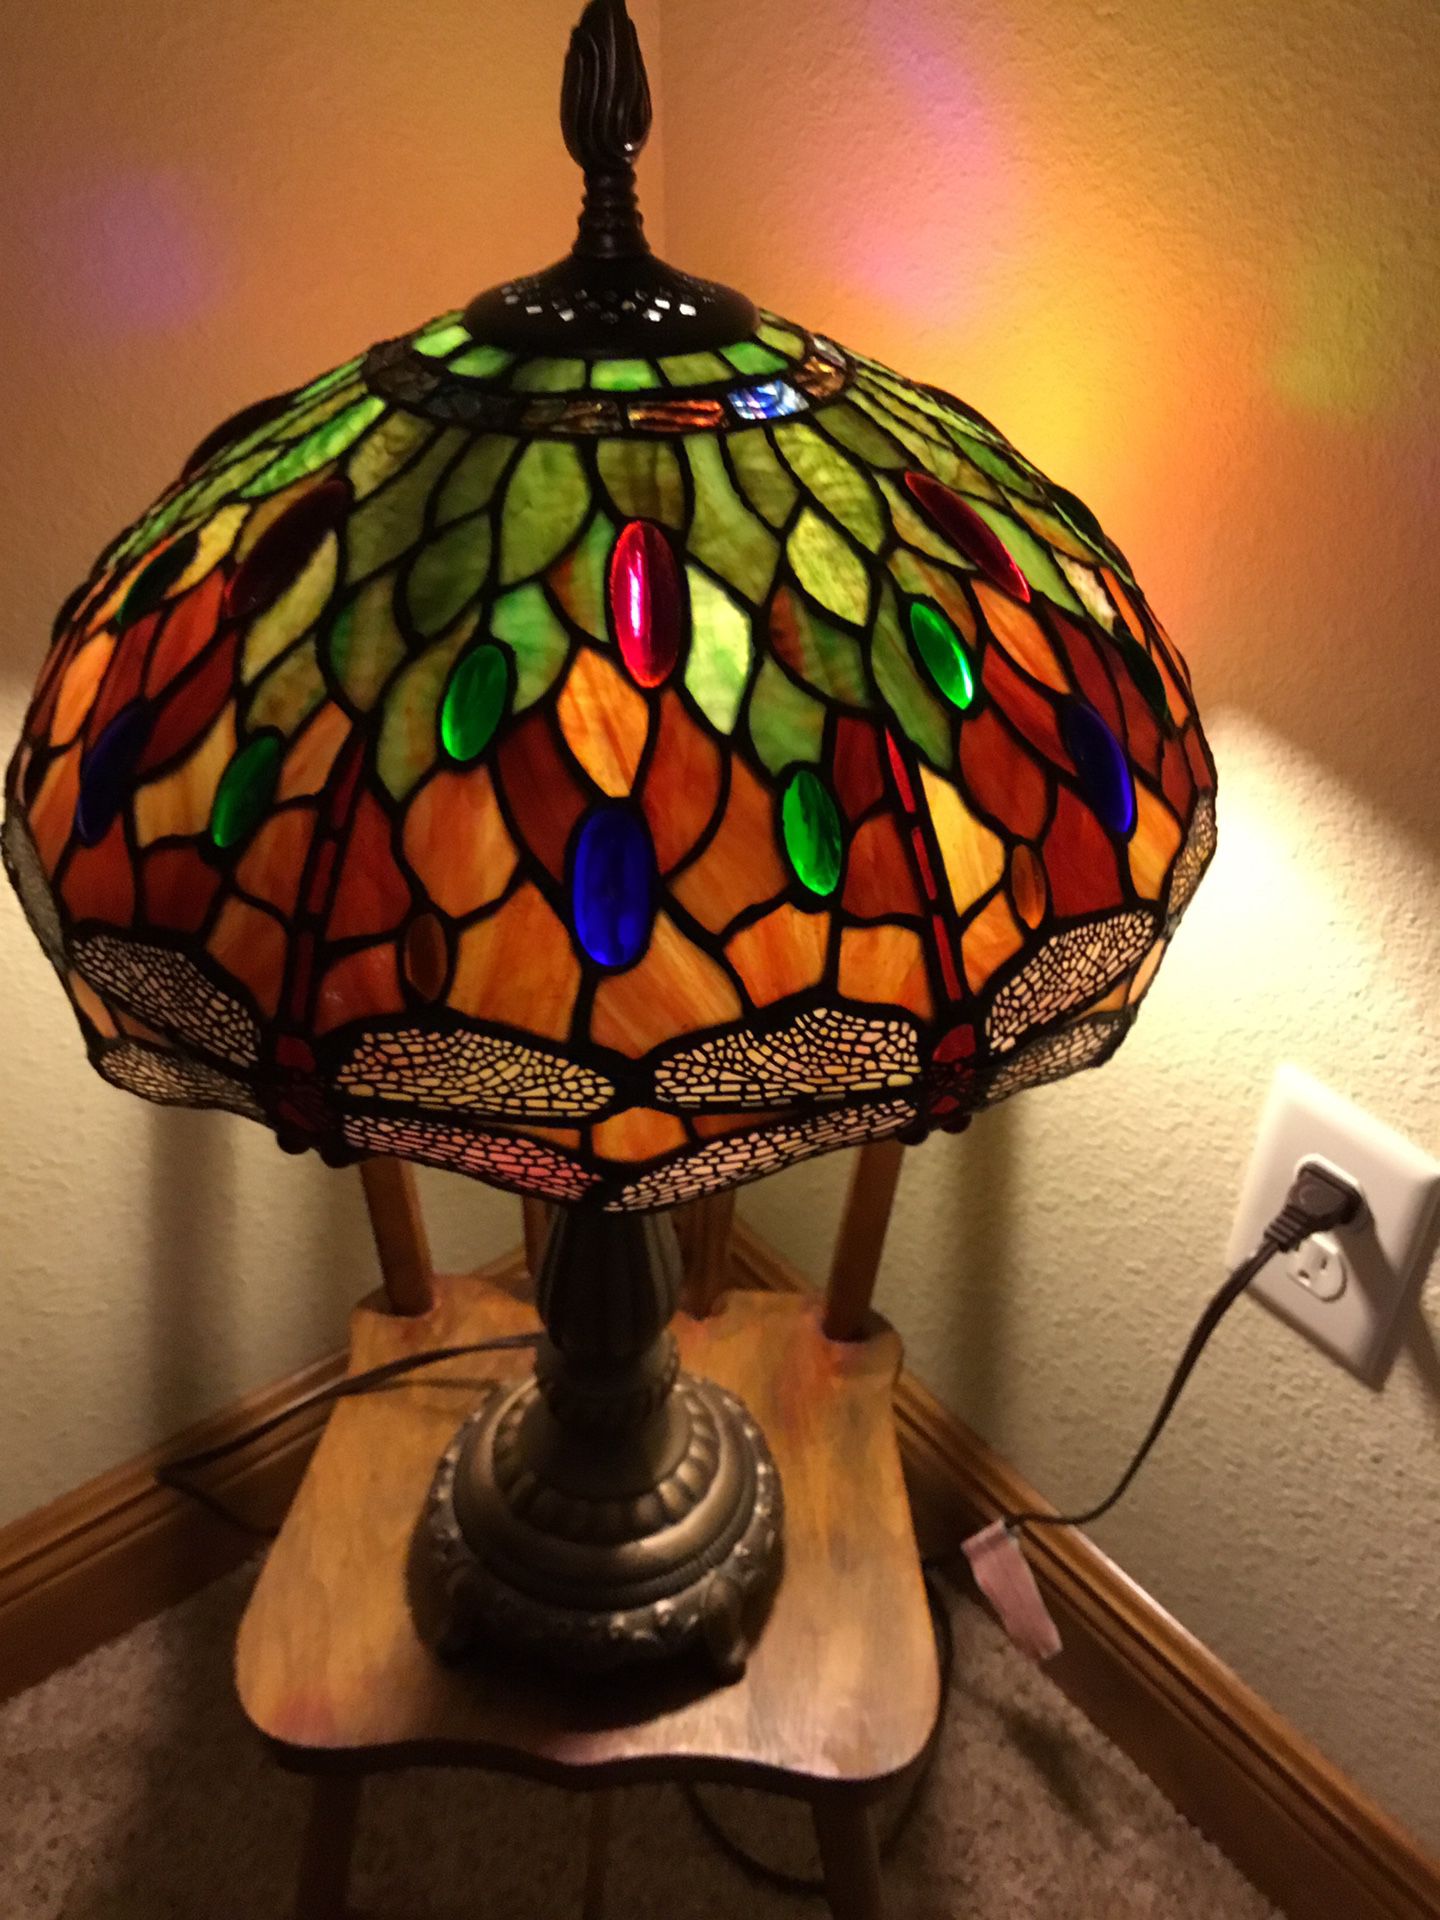 Dragonfly lamp